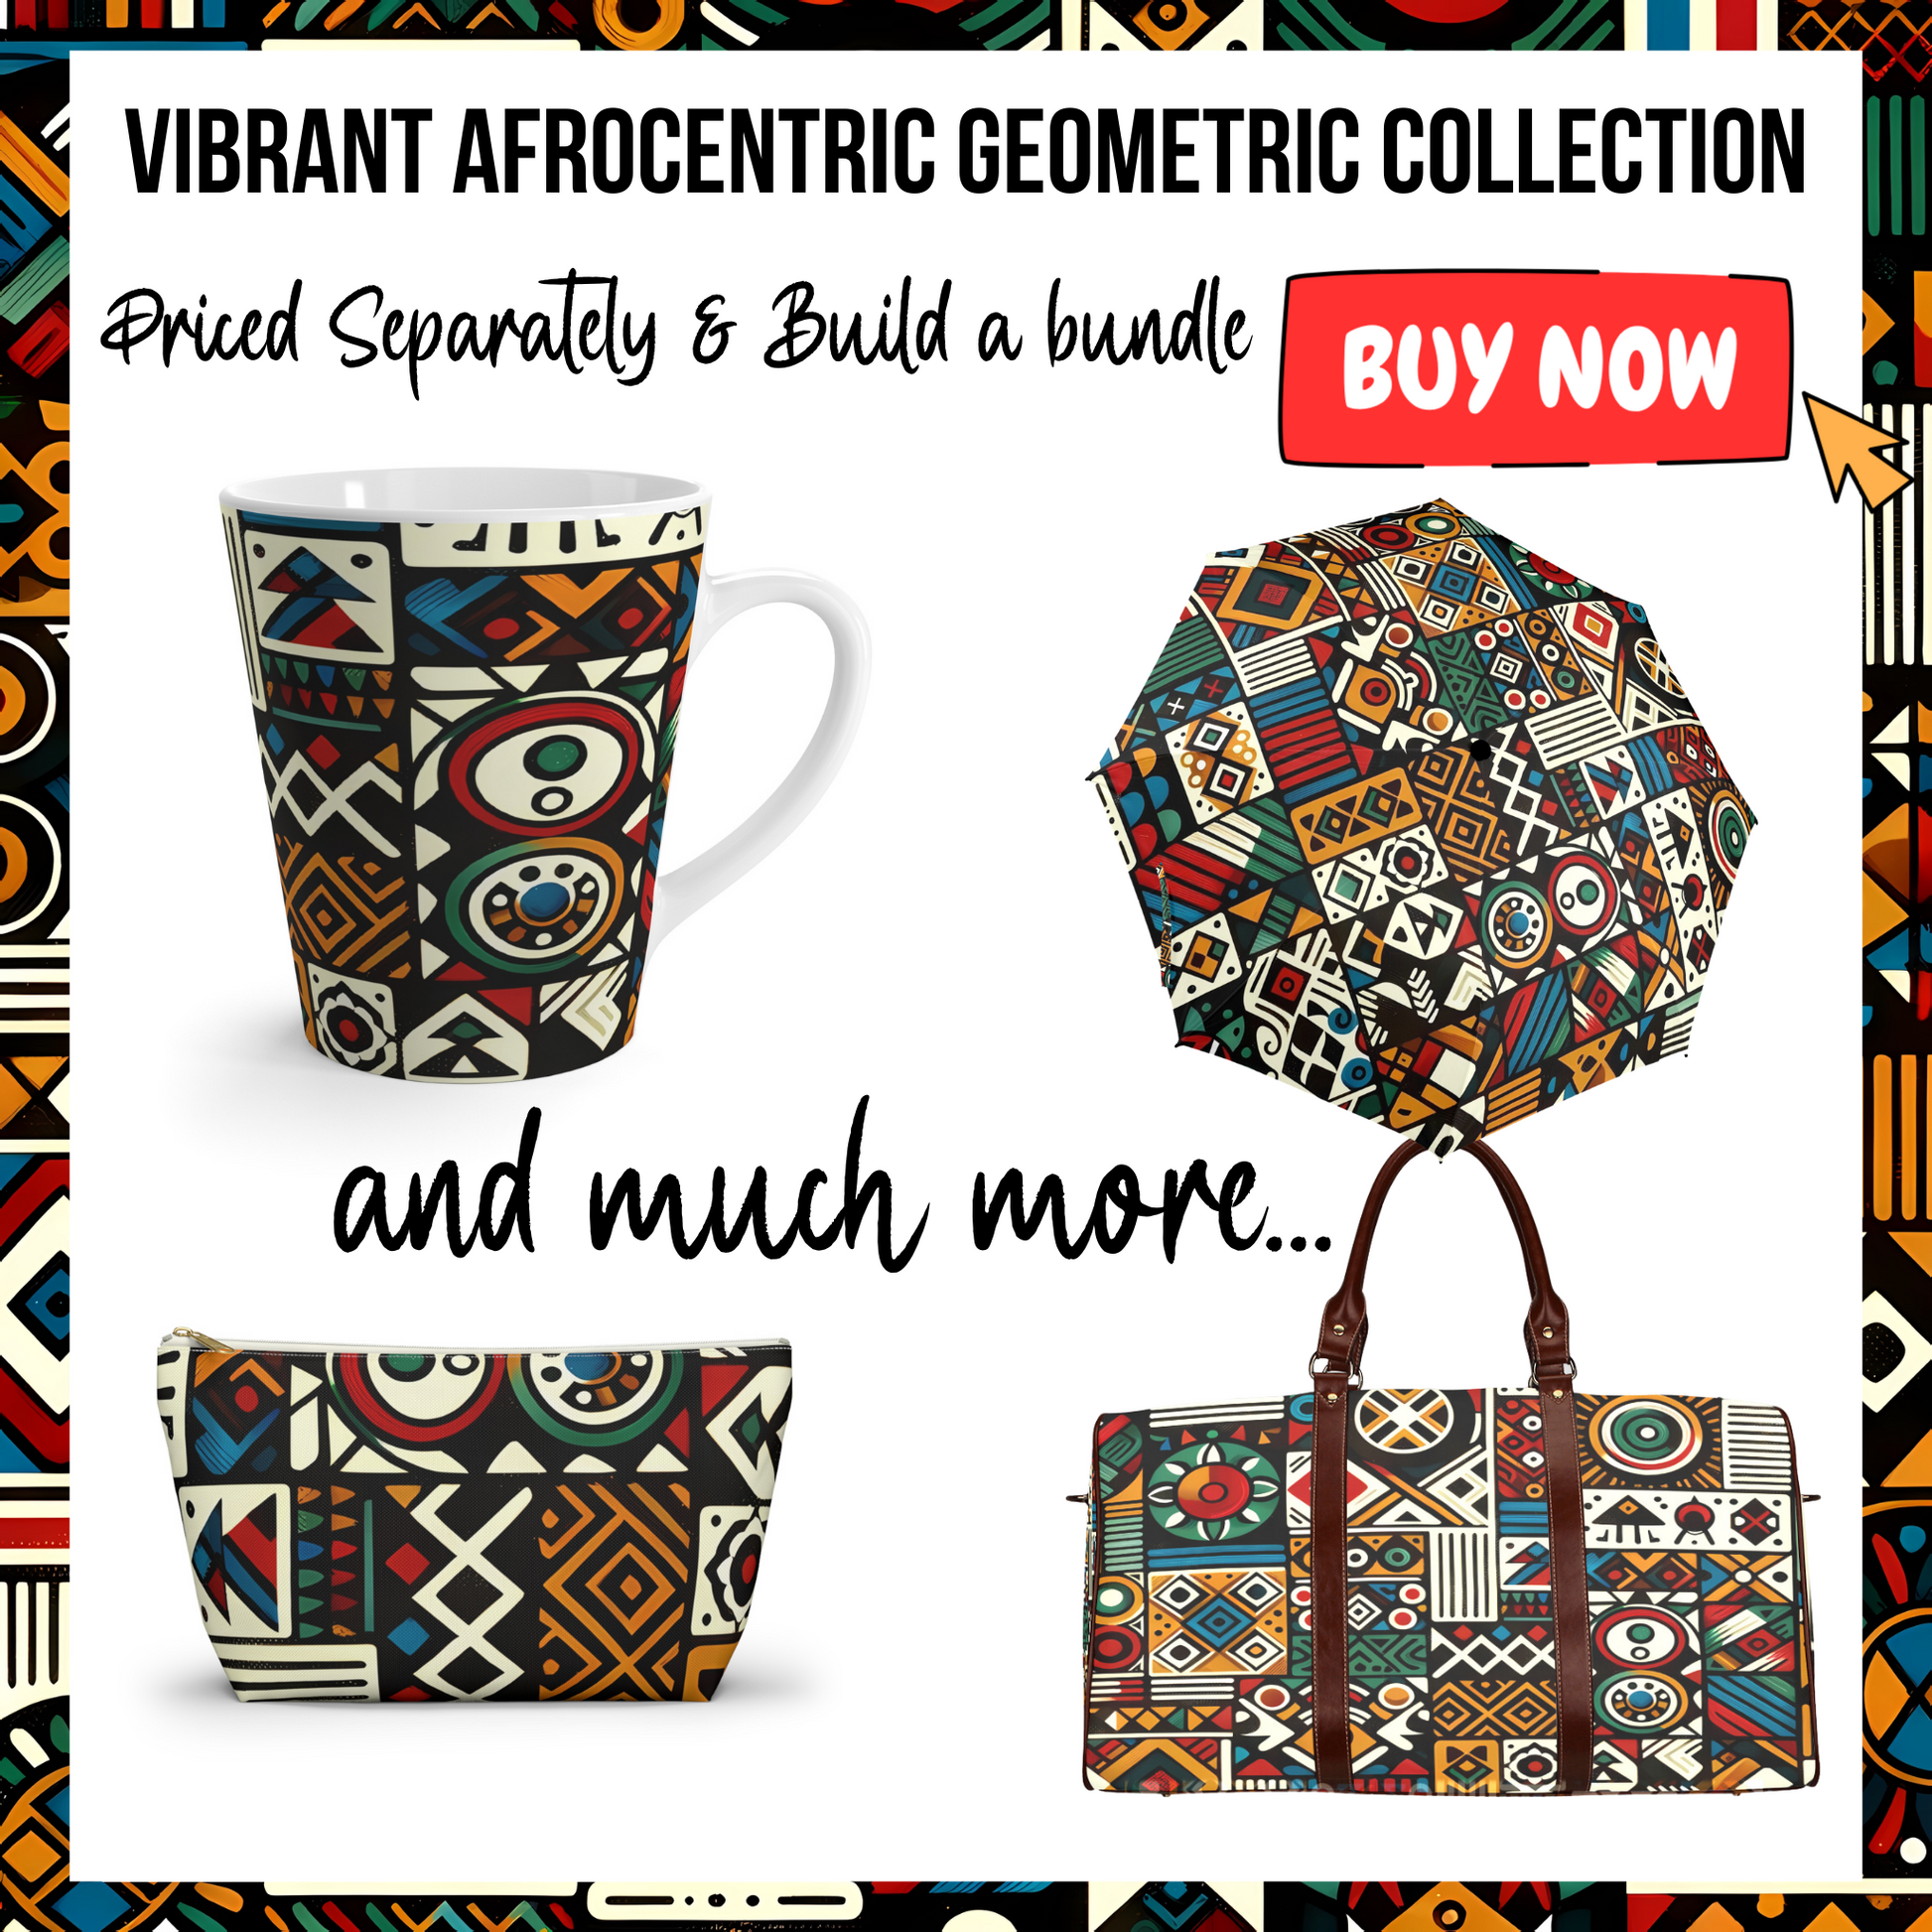 Promotional image for the Vibrant Afrocentric Geometric Collection, featuring a patterned mug, umbrella, and travel bag with the text 'Priced Separately & Build a bundle' and a red 'Buy Now' button, offering a glimpse into a wider range of matching patterned products.